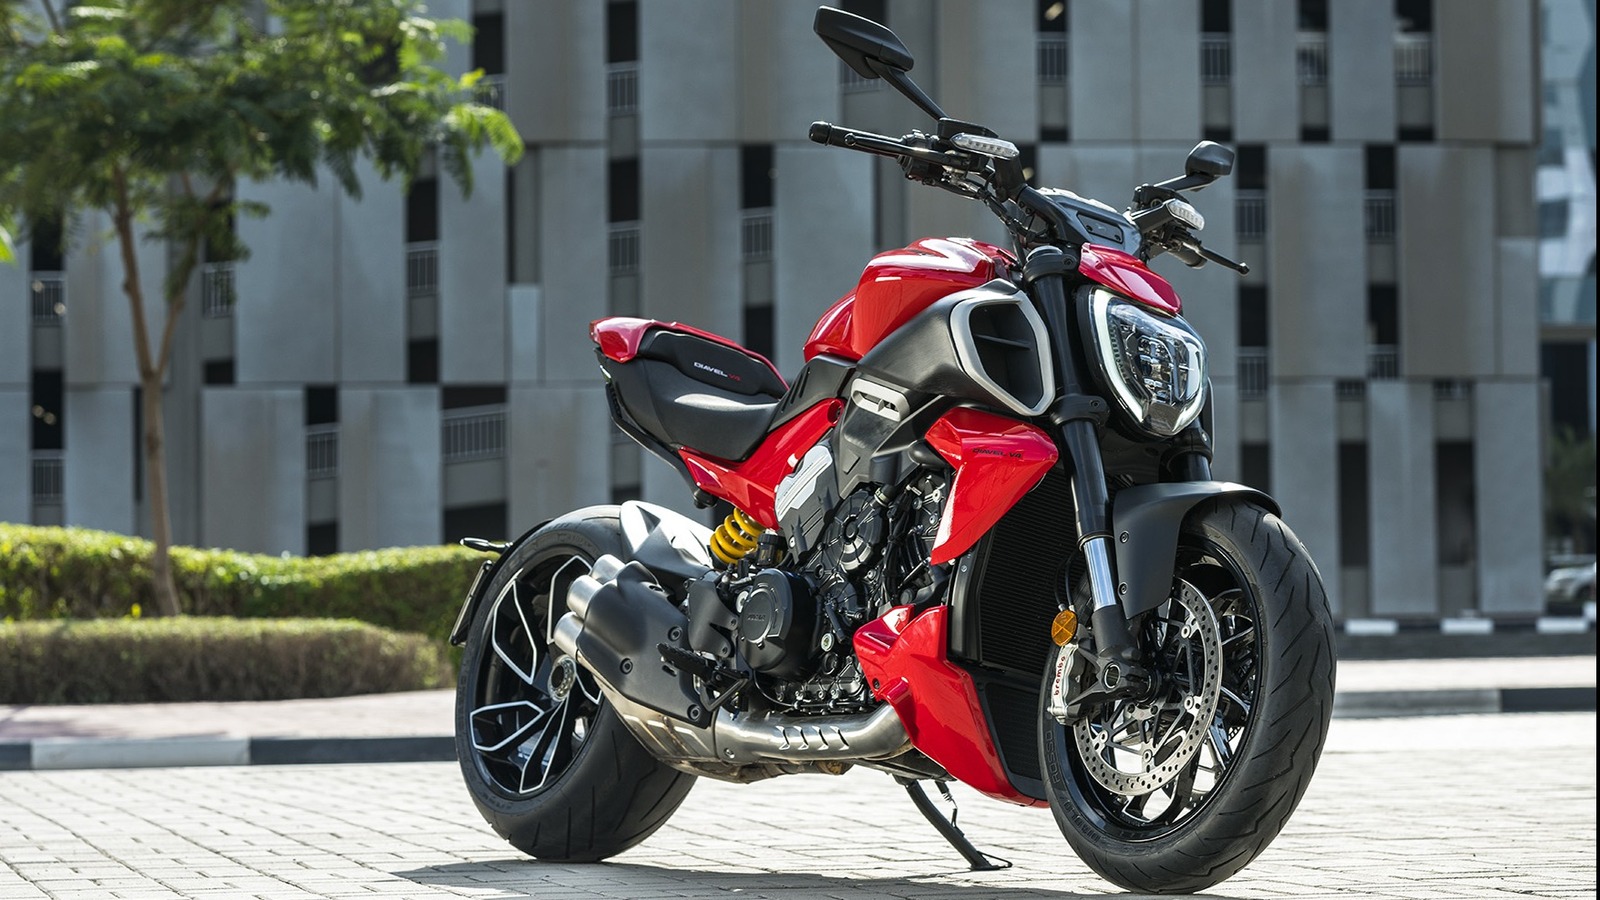 10 Of The Most Popular Motorcycles For Larger Riders